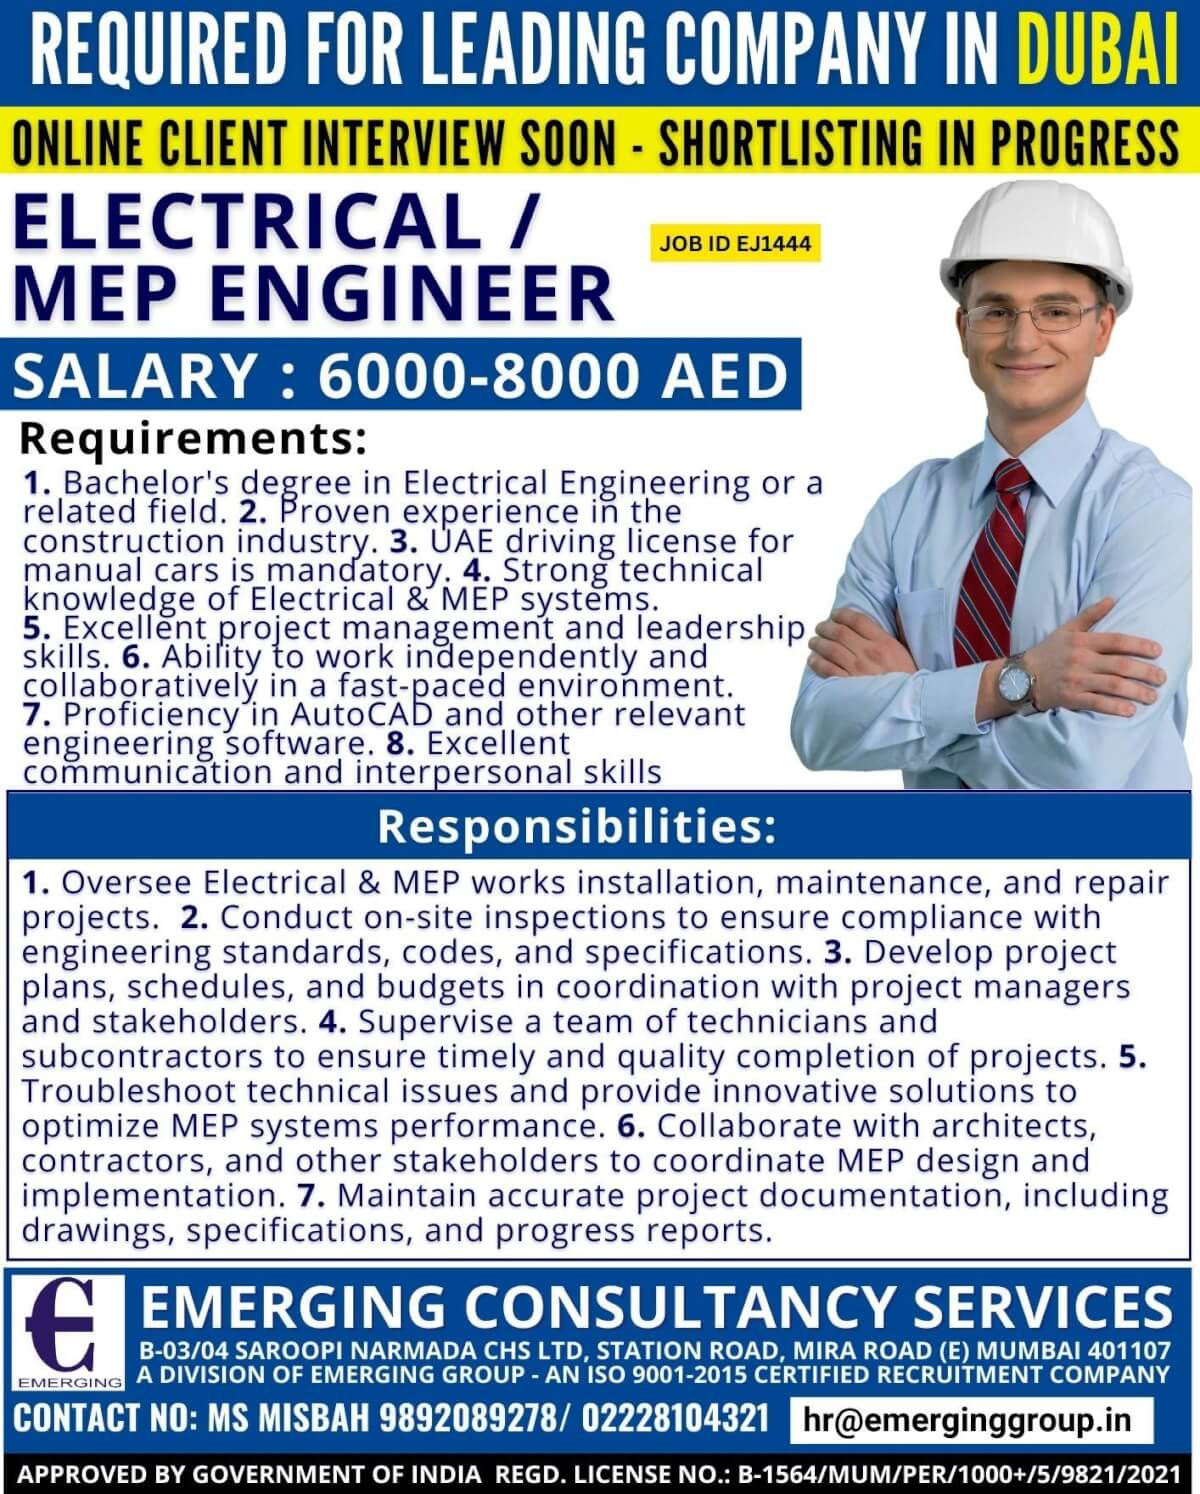 URGENTLY REQUIRED FOR LEADING COMPANY IN DUBAI - INTERVIEW SOON